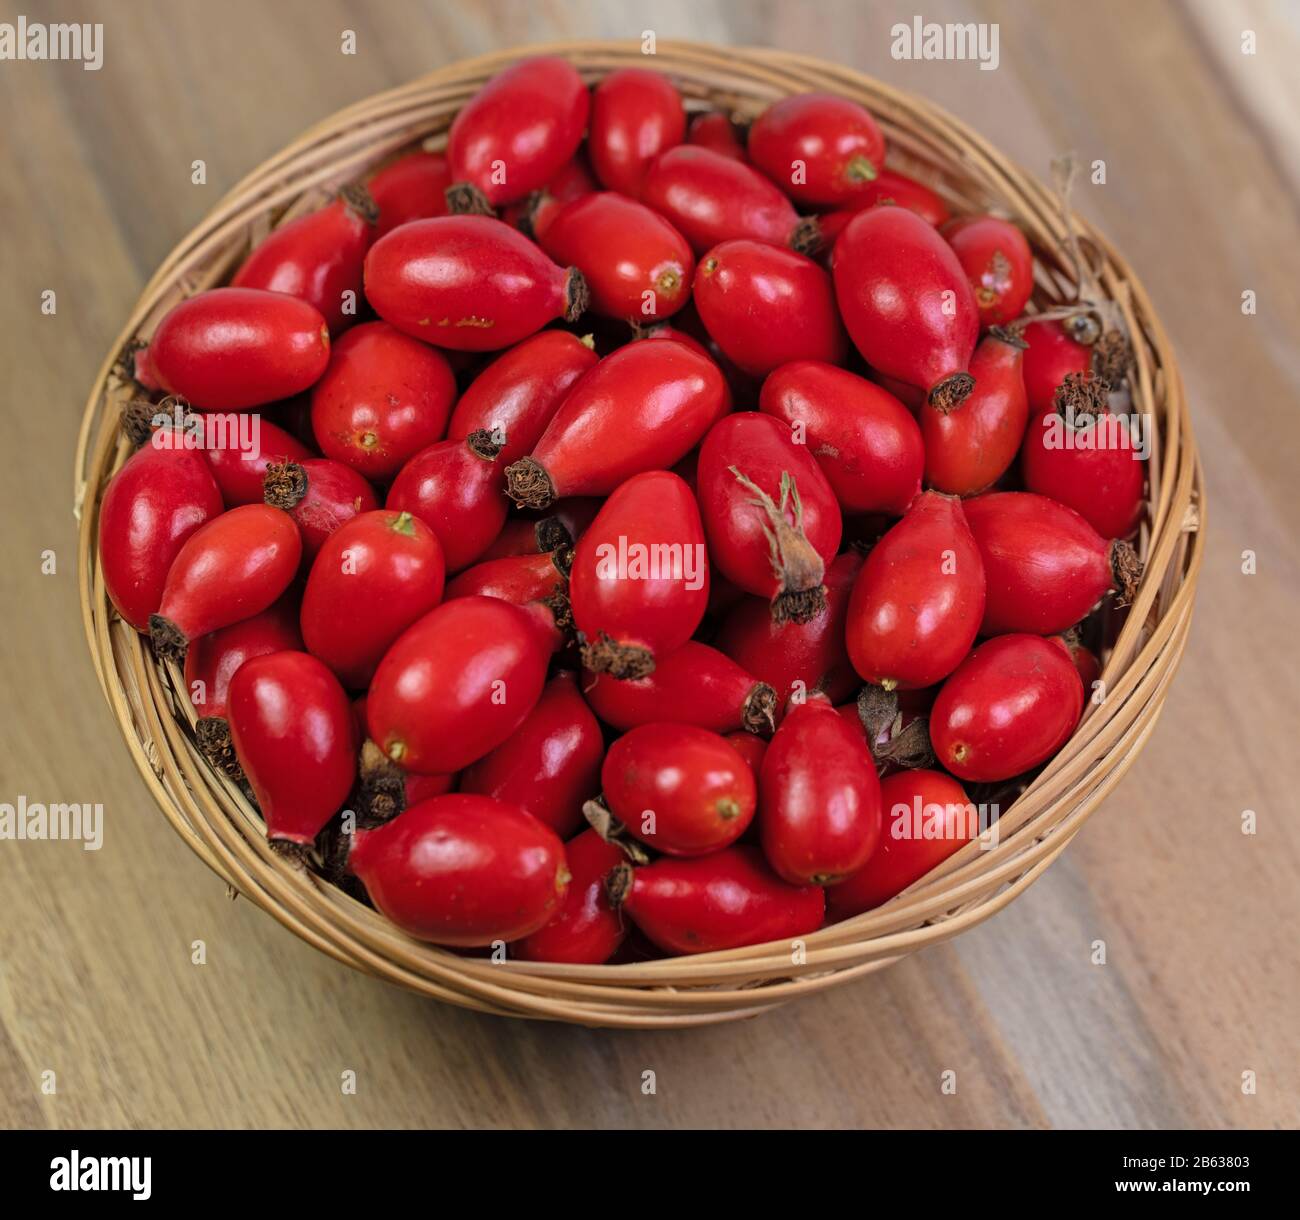 Freshly picked rose hips in a basket Stock Photo